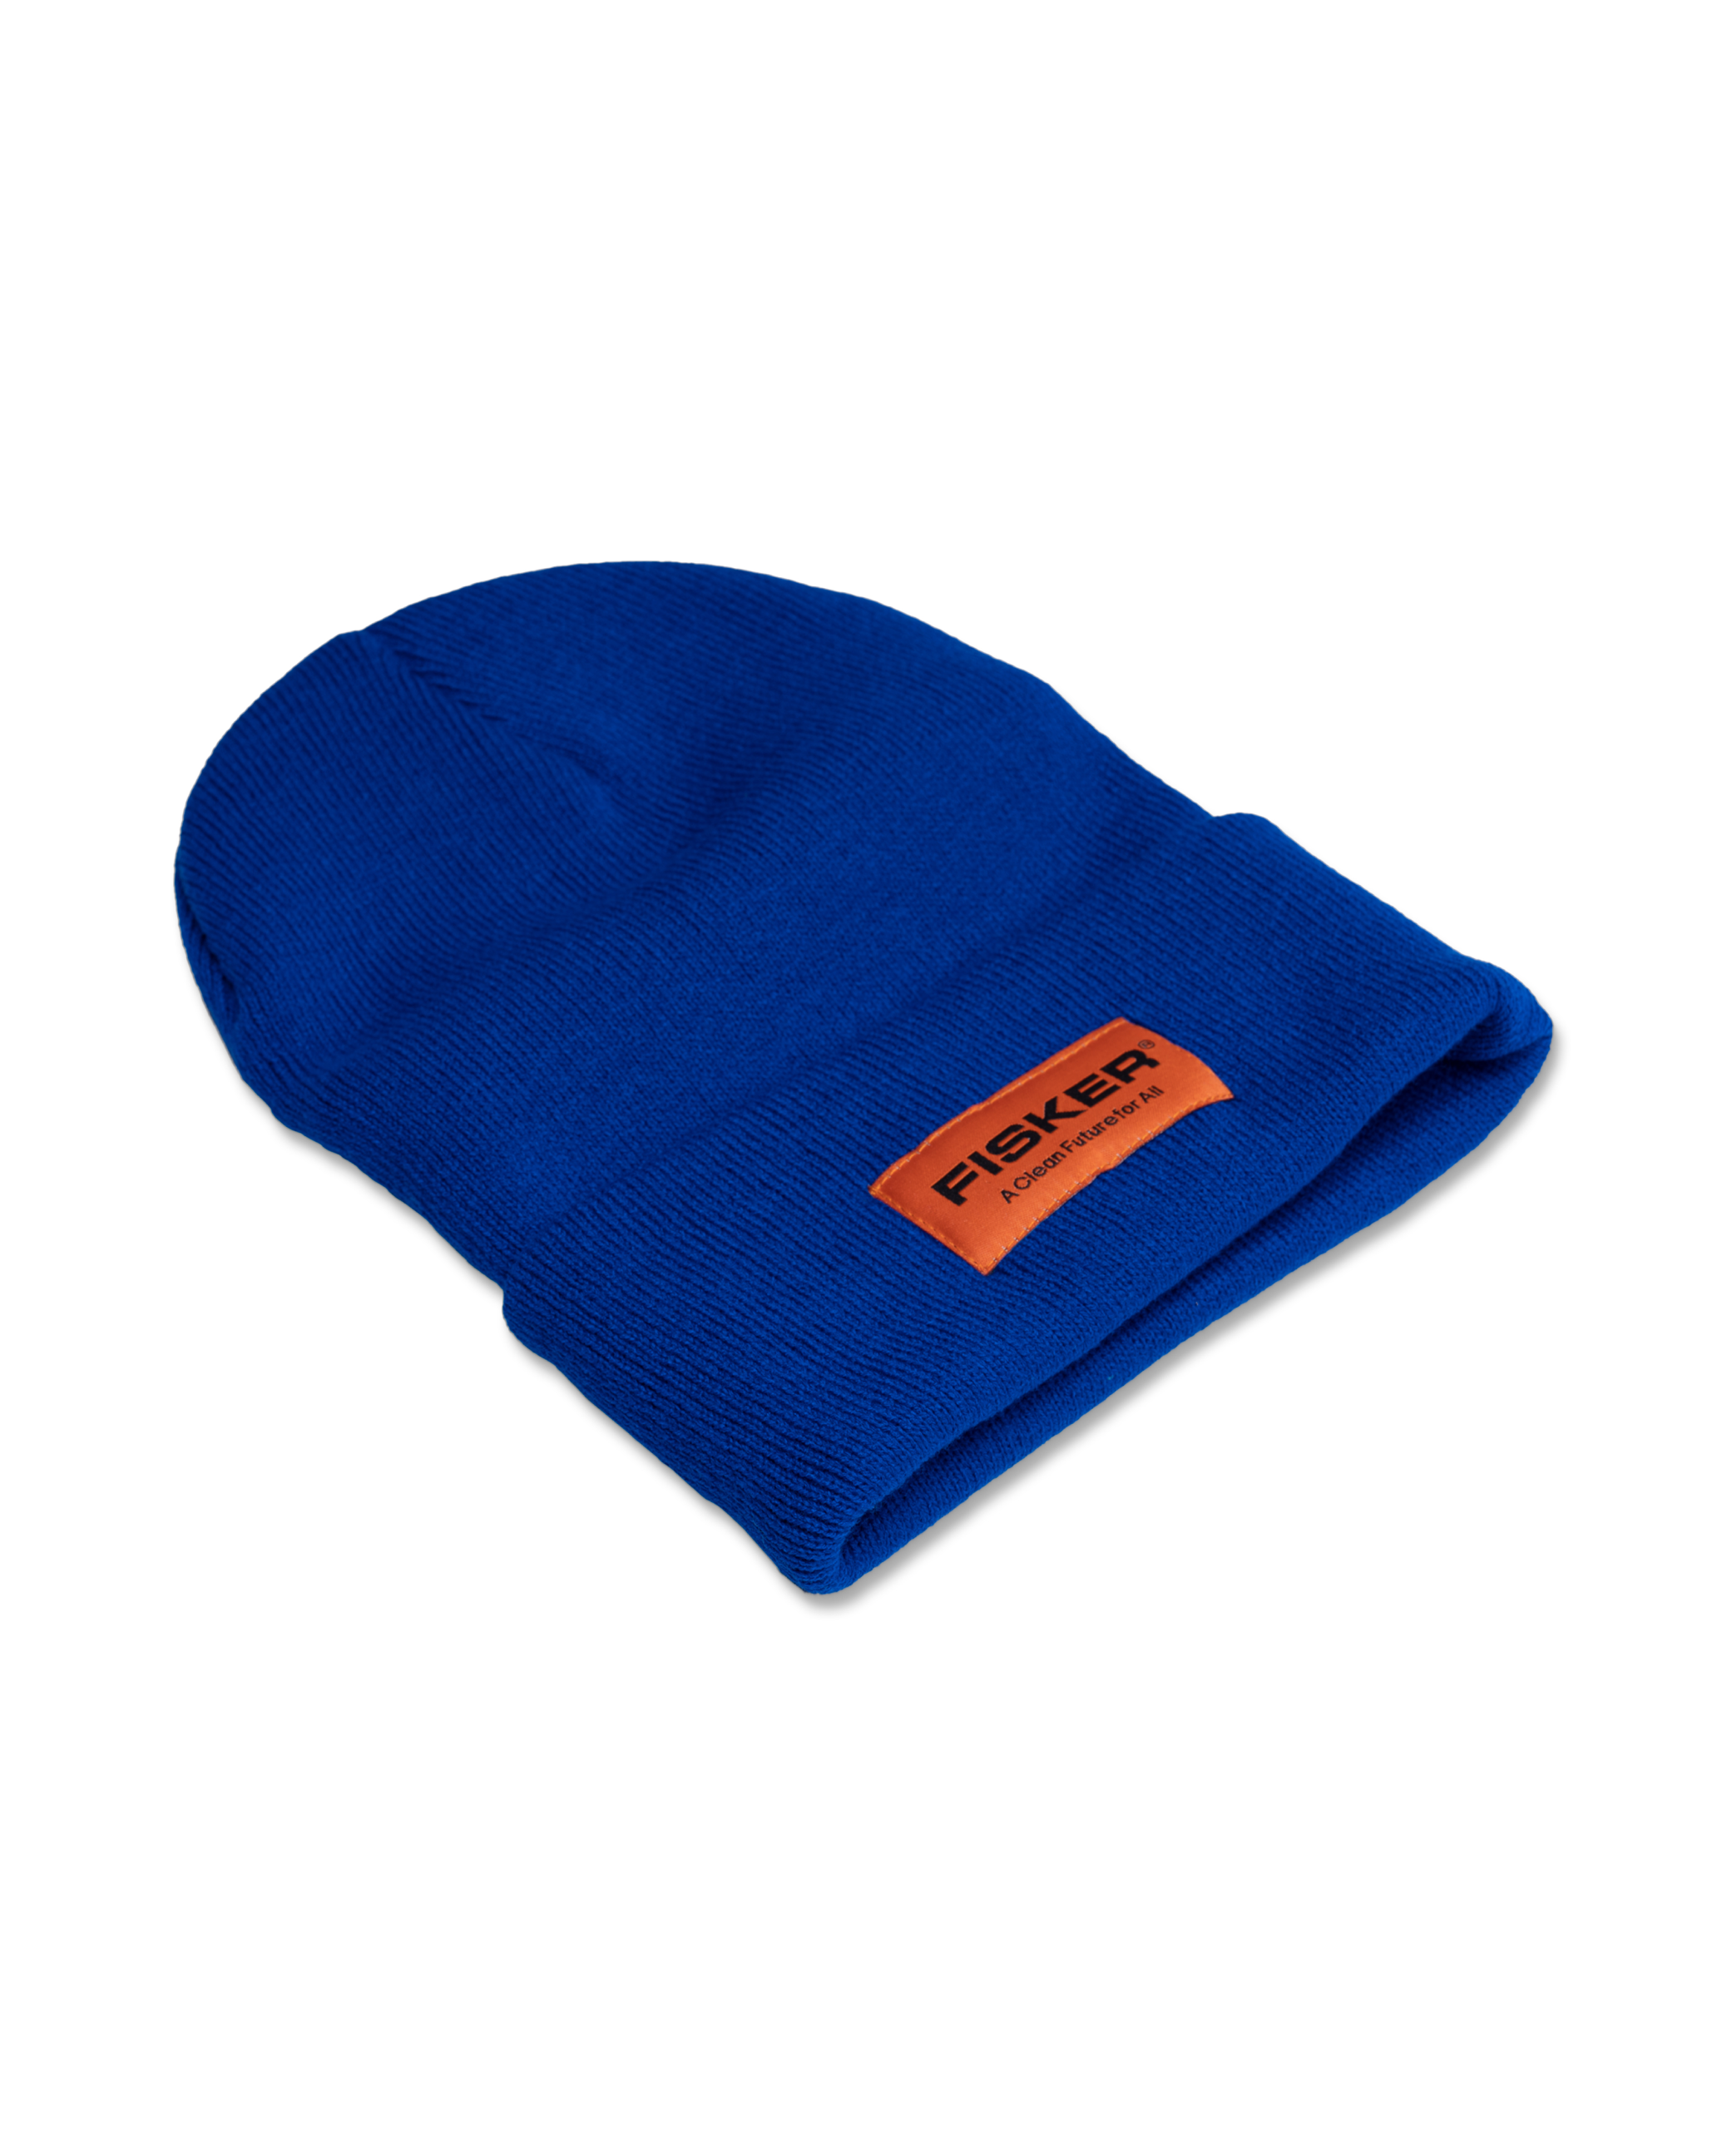 Fisker Bright Blue Beanie, , large image number 1